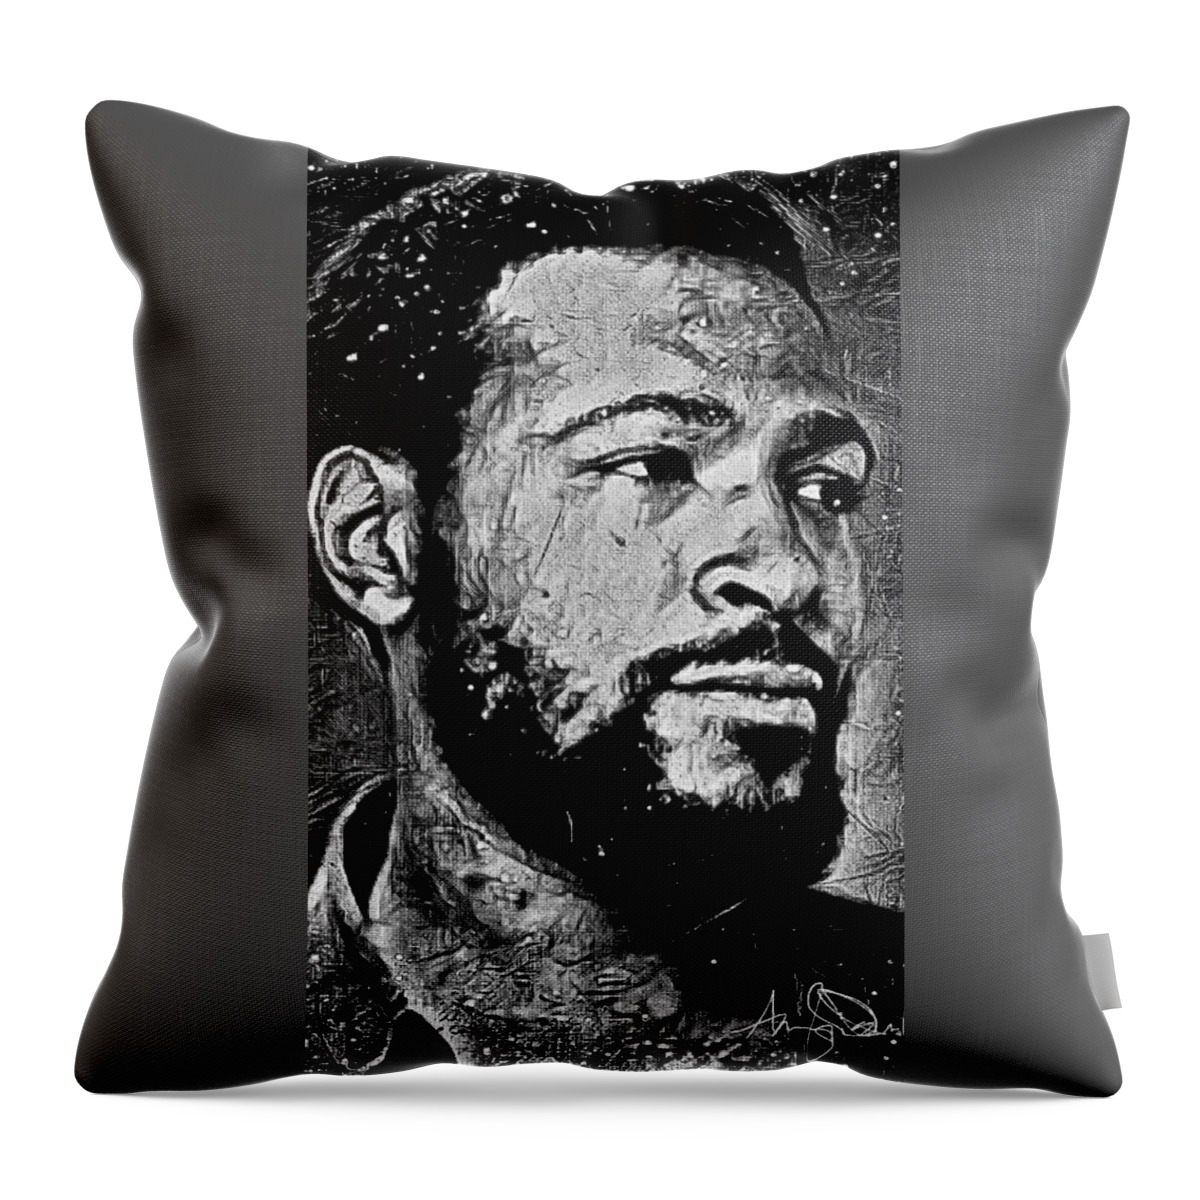  Throw Pillow featuring the mixed media Marvin by Angie ONeal